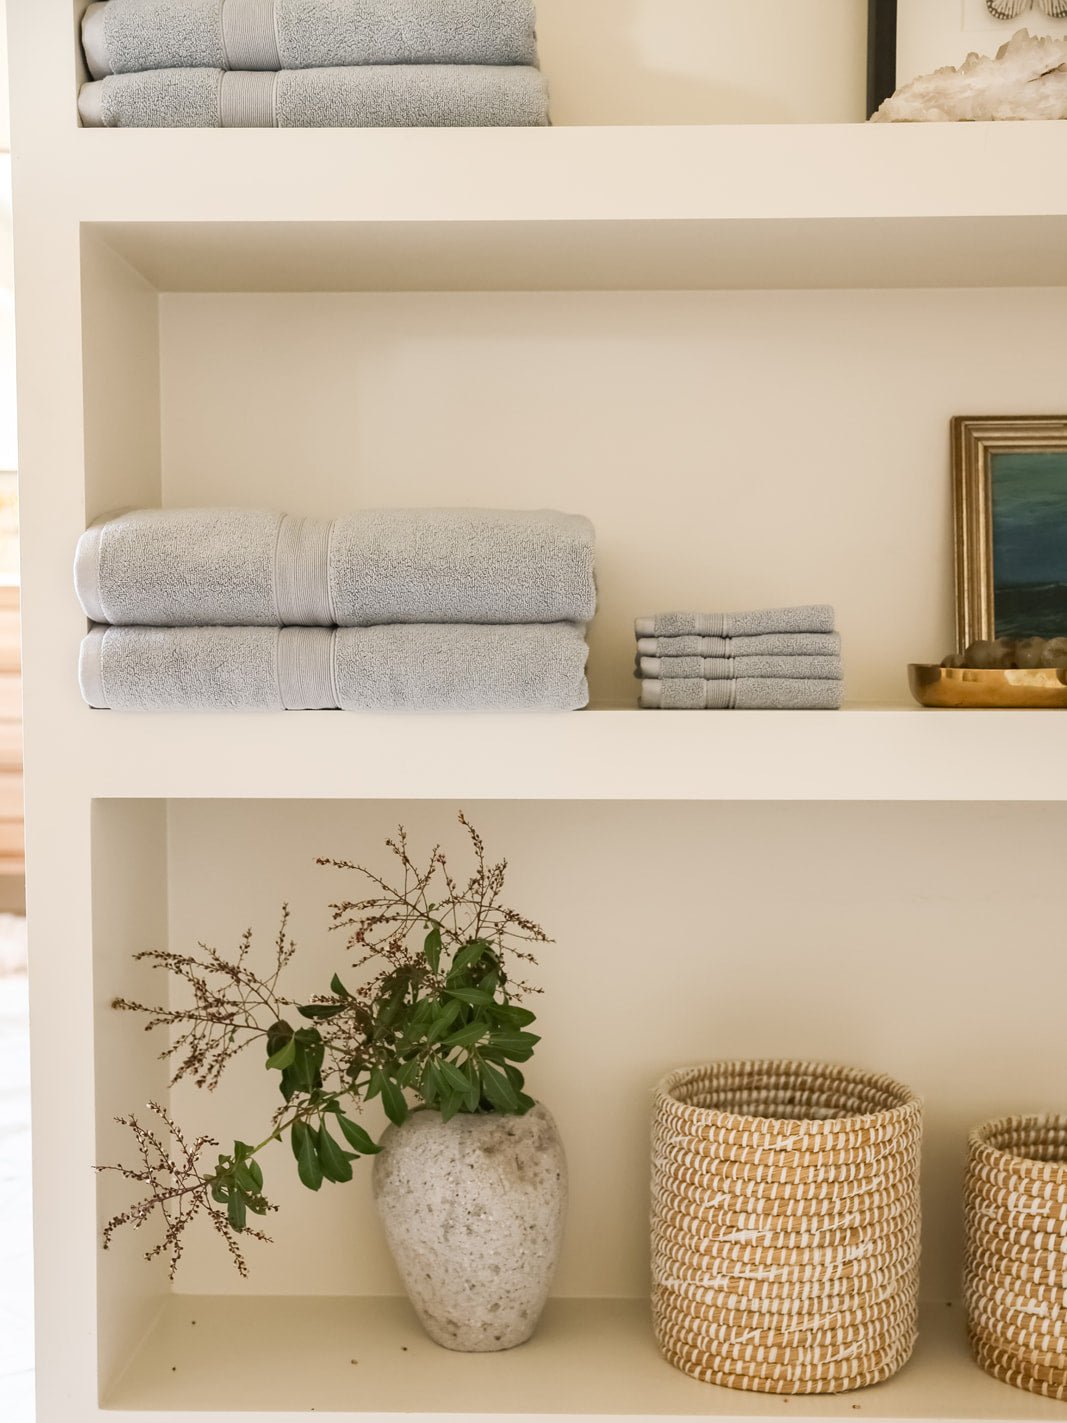 Harbor mist luxe bath towels and washcloths folded on shelves 